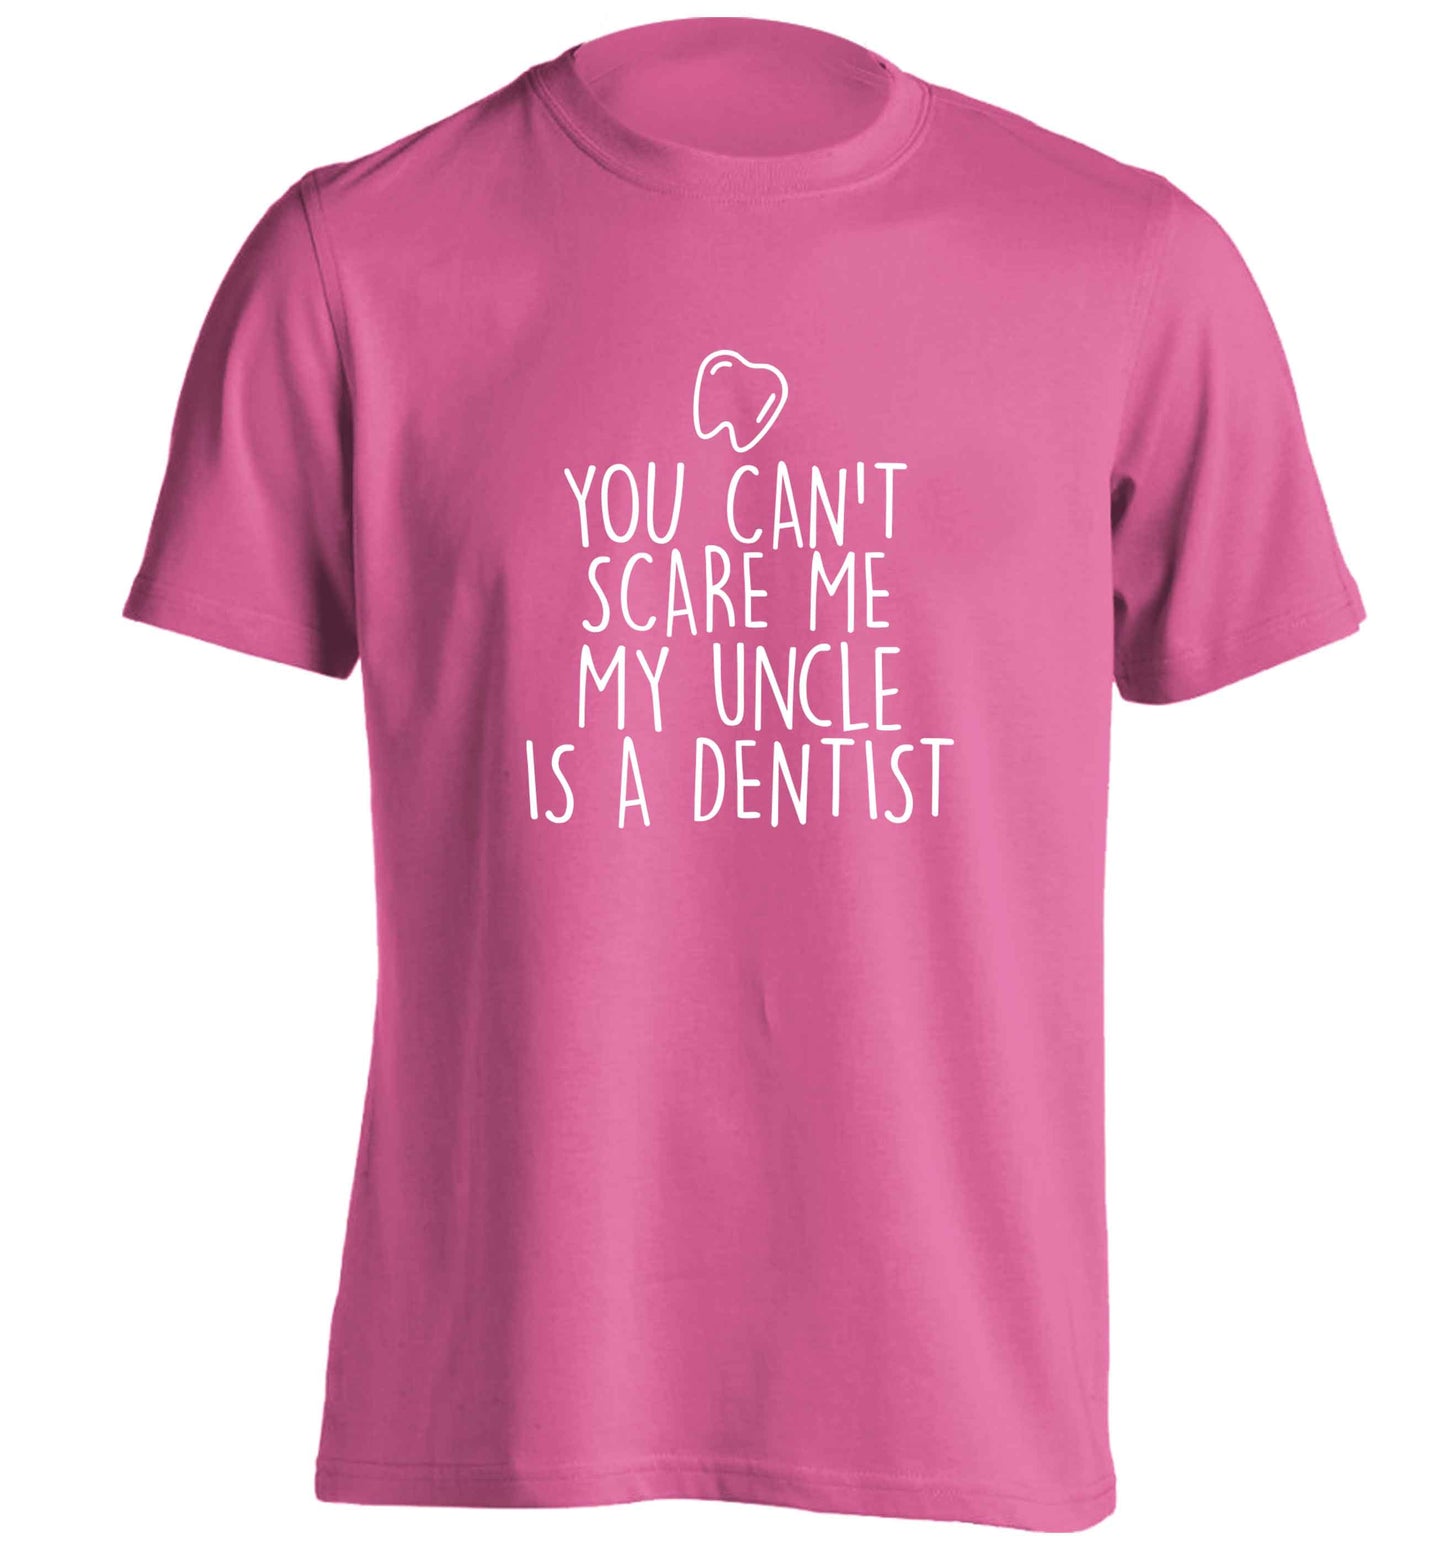 You can't scare me my uncle is a dentist adults unisex pink Tshirt 2XL